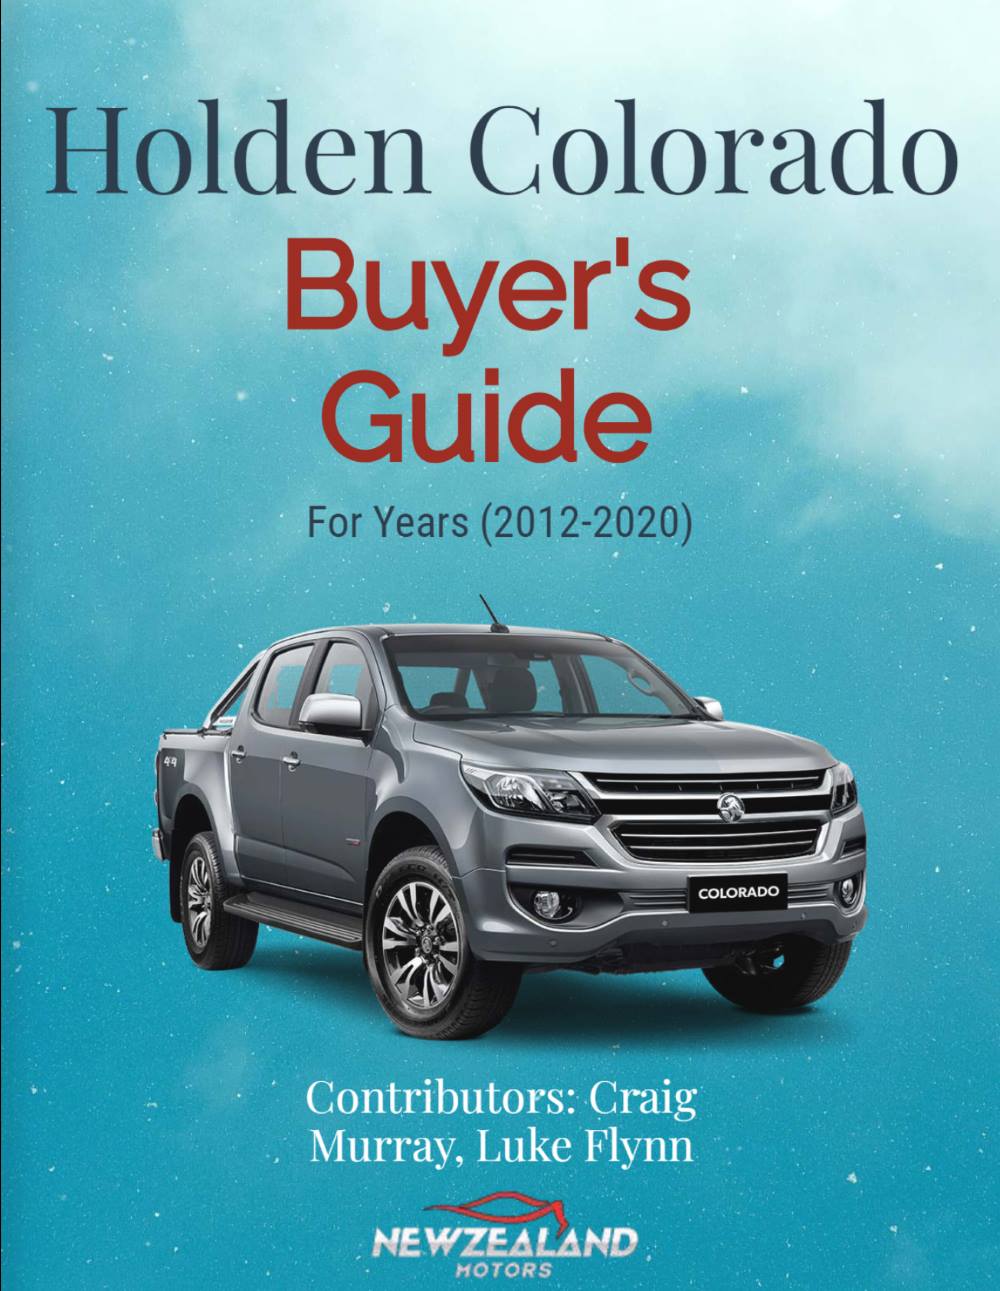 Holden Colorado Buyer’s Guide (2012-2020) for New Zealand